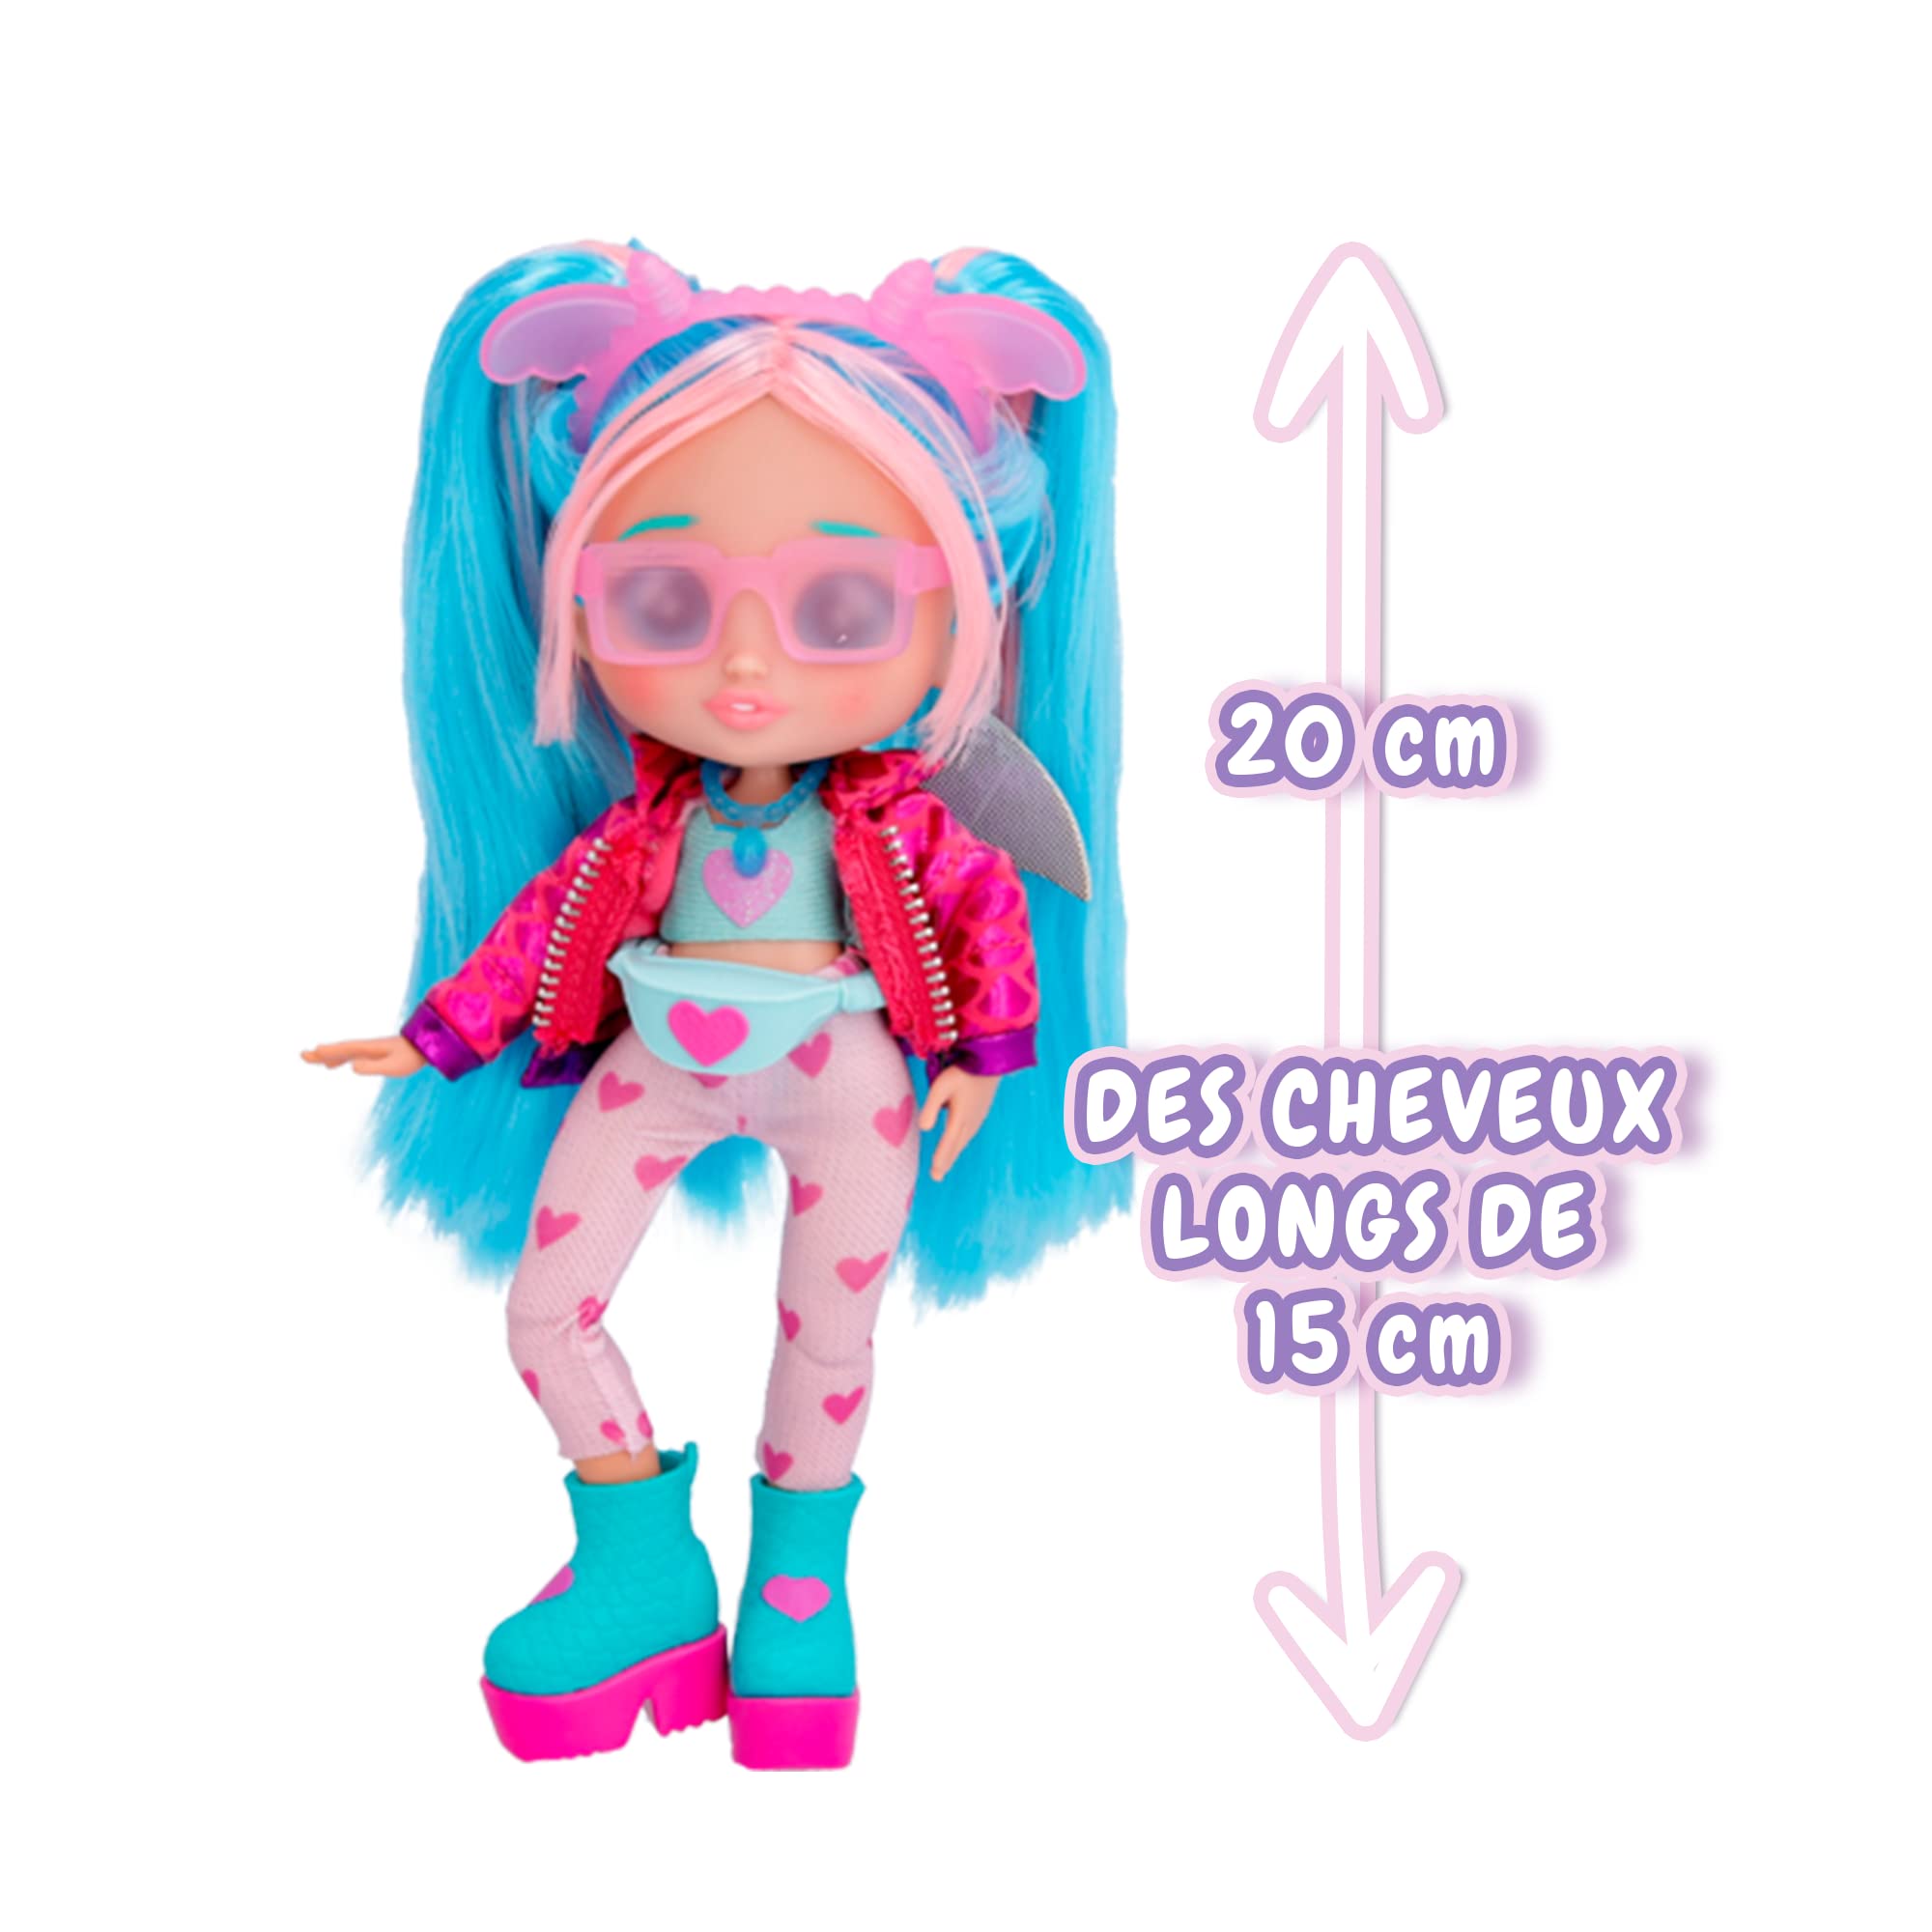 Cry Babies BFF Bruny Fashion Doll with 9+ Surprises Including Outfit and Accessories for Fashion Toy, Girls and Boys Ages 4 and Up, 7.8 Inch Doll, Multicolor